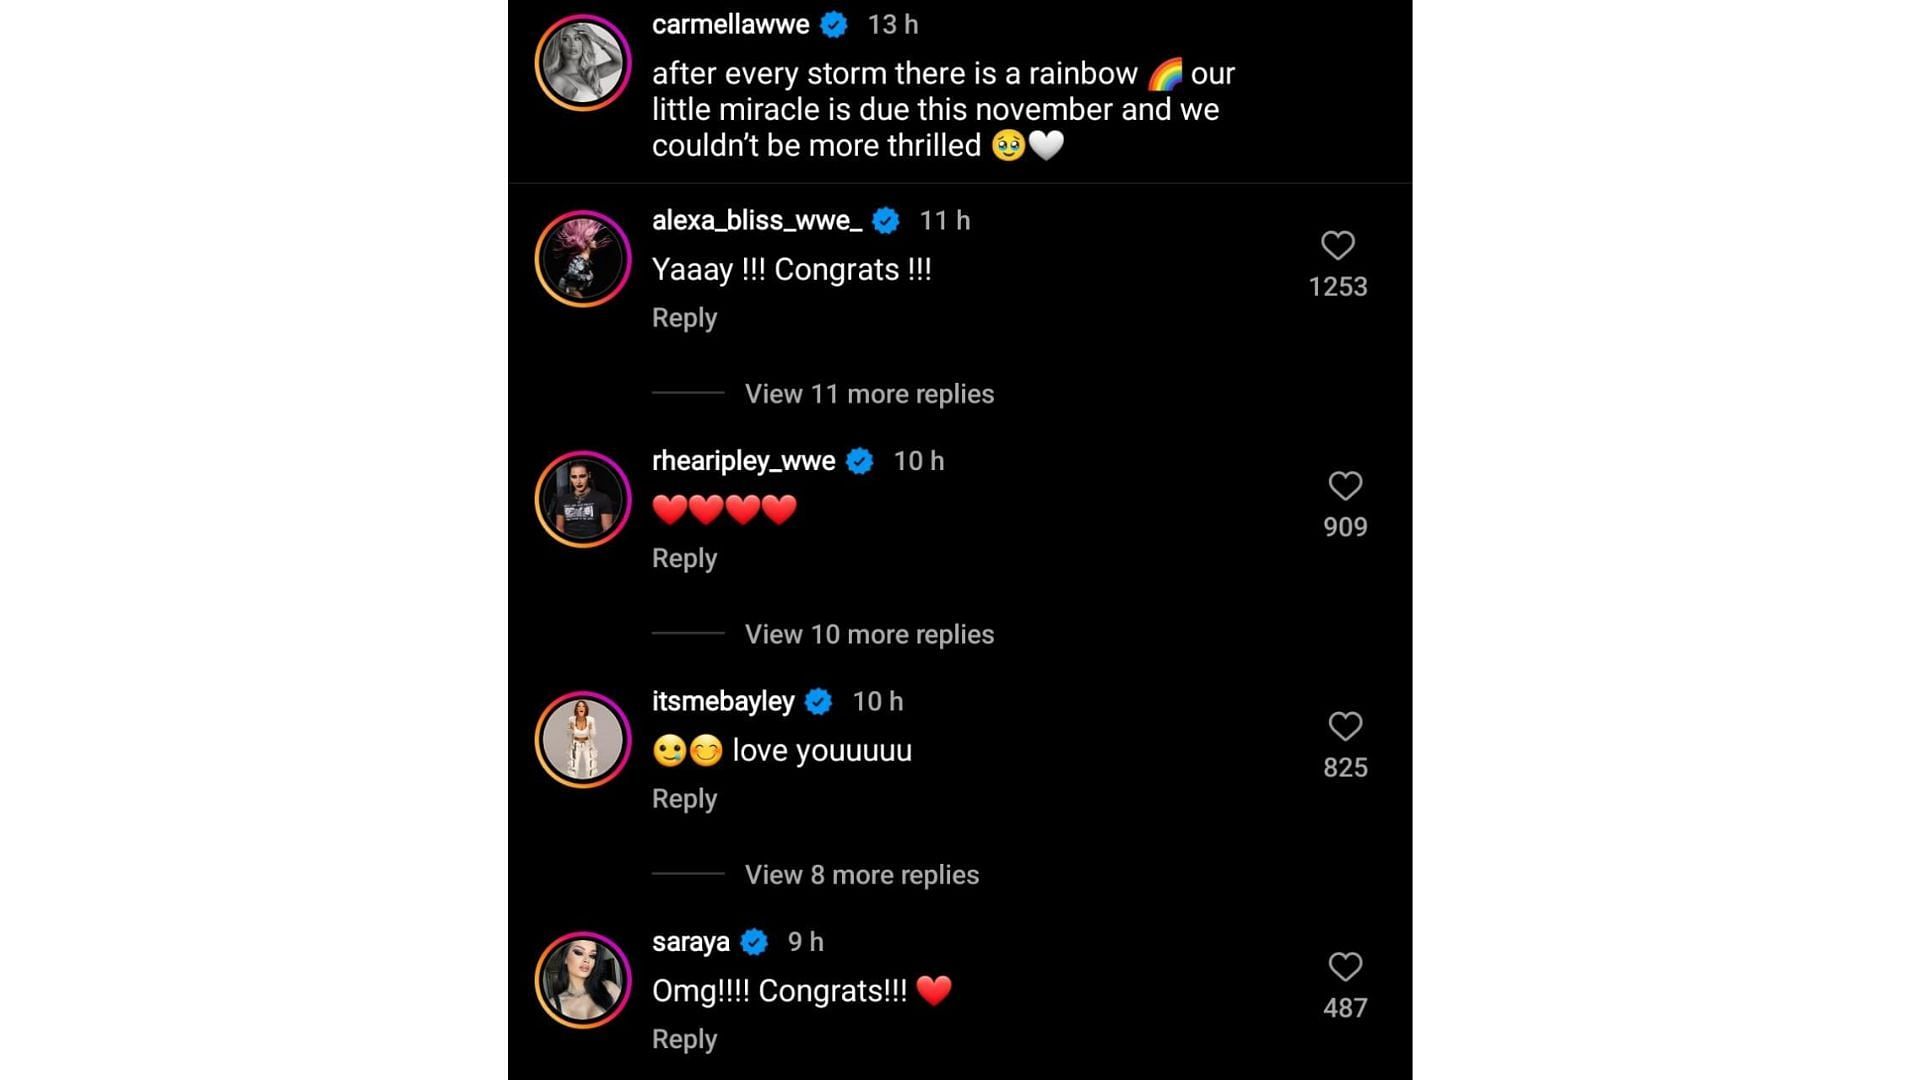 Saraya congratulated Carmella and Corey Graves on the announcement of their pregnancy.